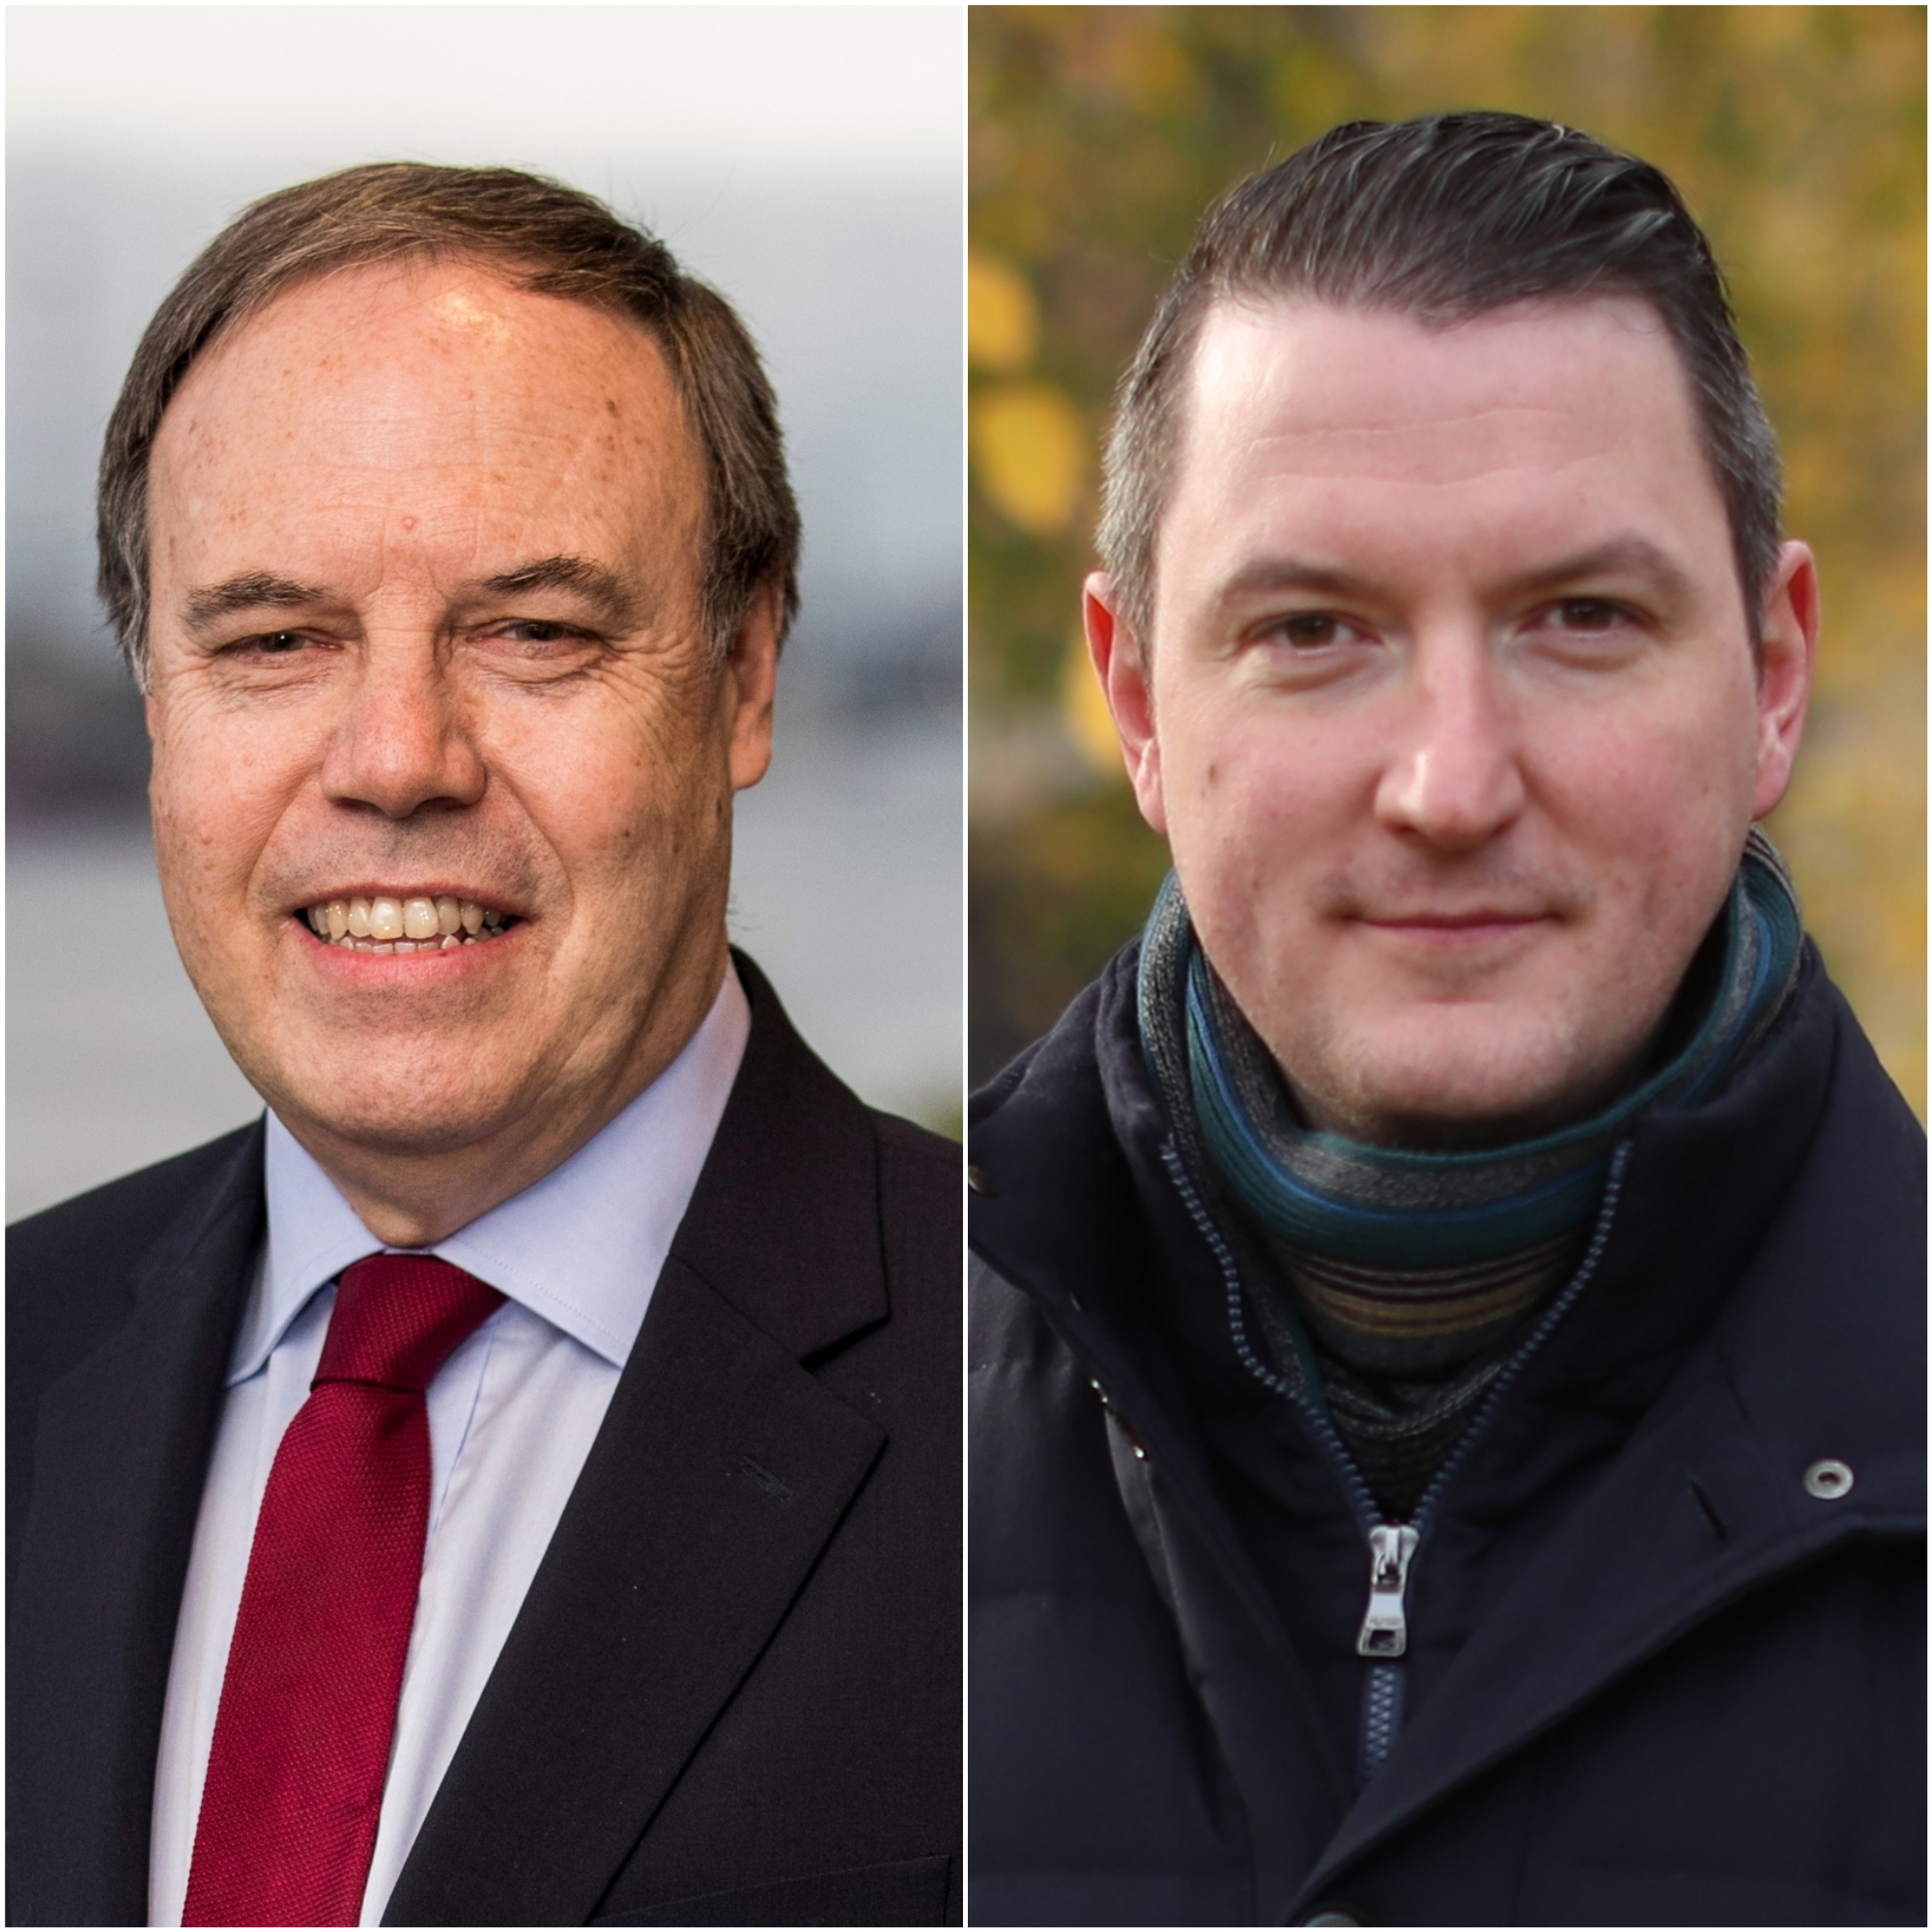 The battle between DUP deputy leader Nigel Dodds and Sinn Fein's John Finucane is set to be one of the most watched contests in Northern Ireland 